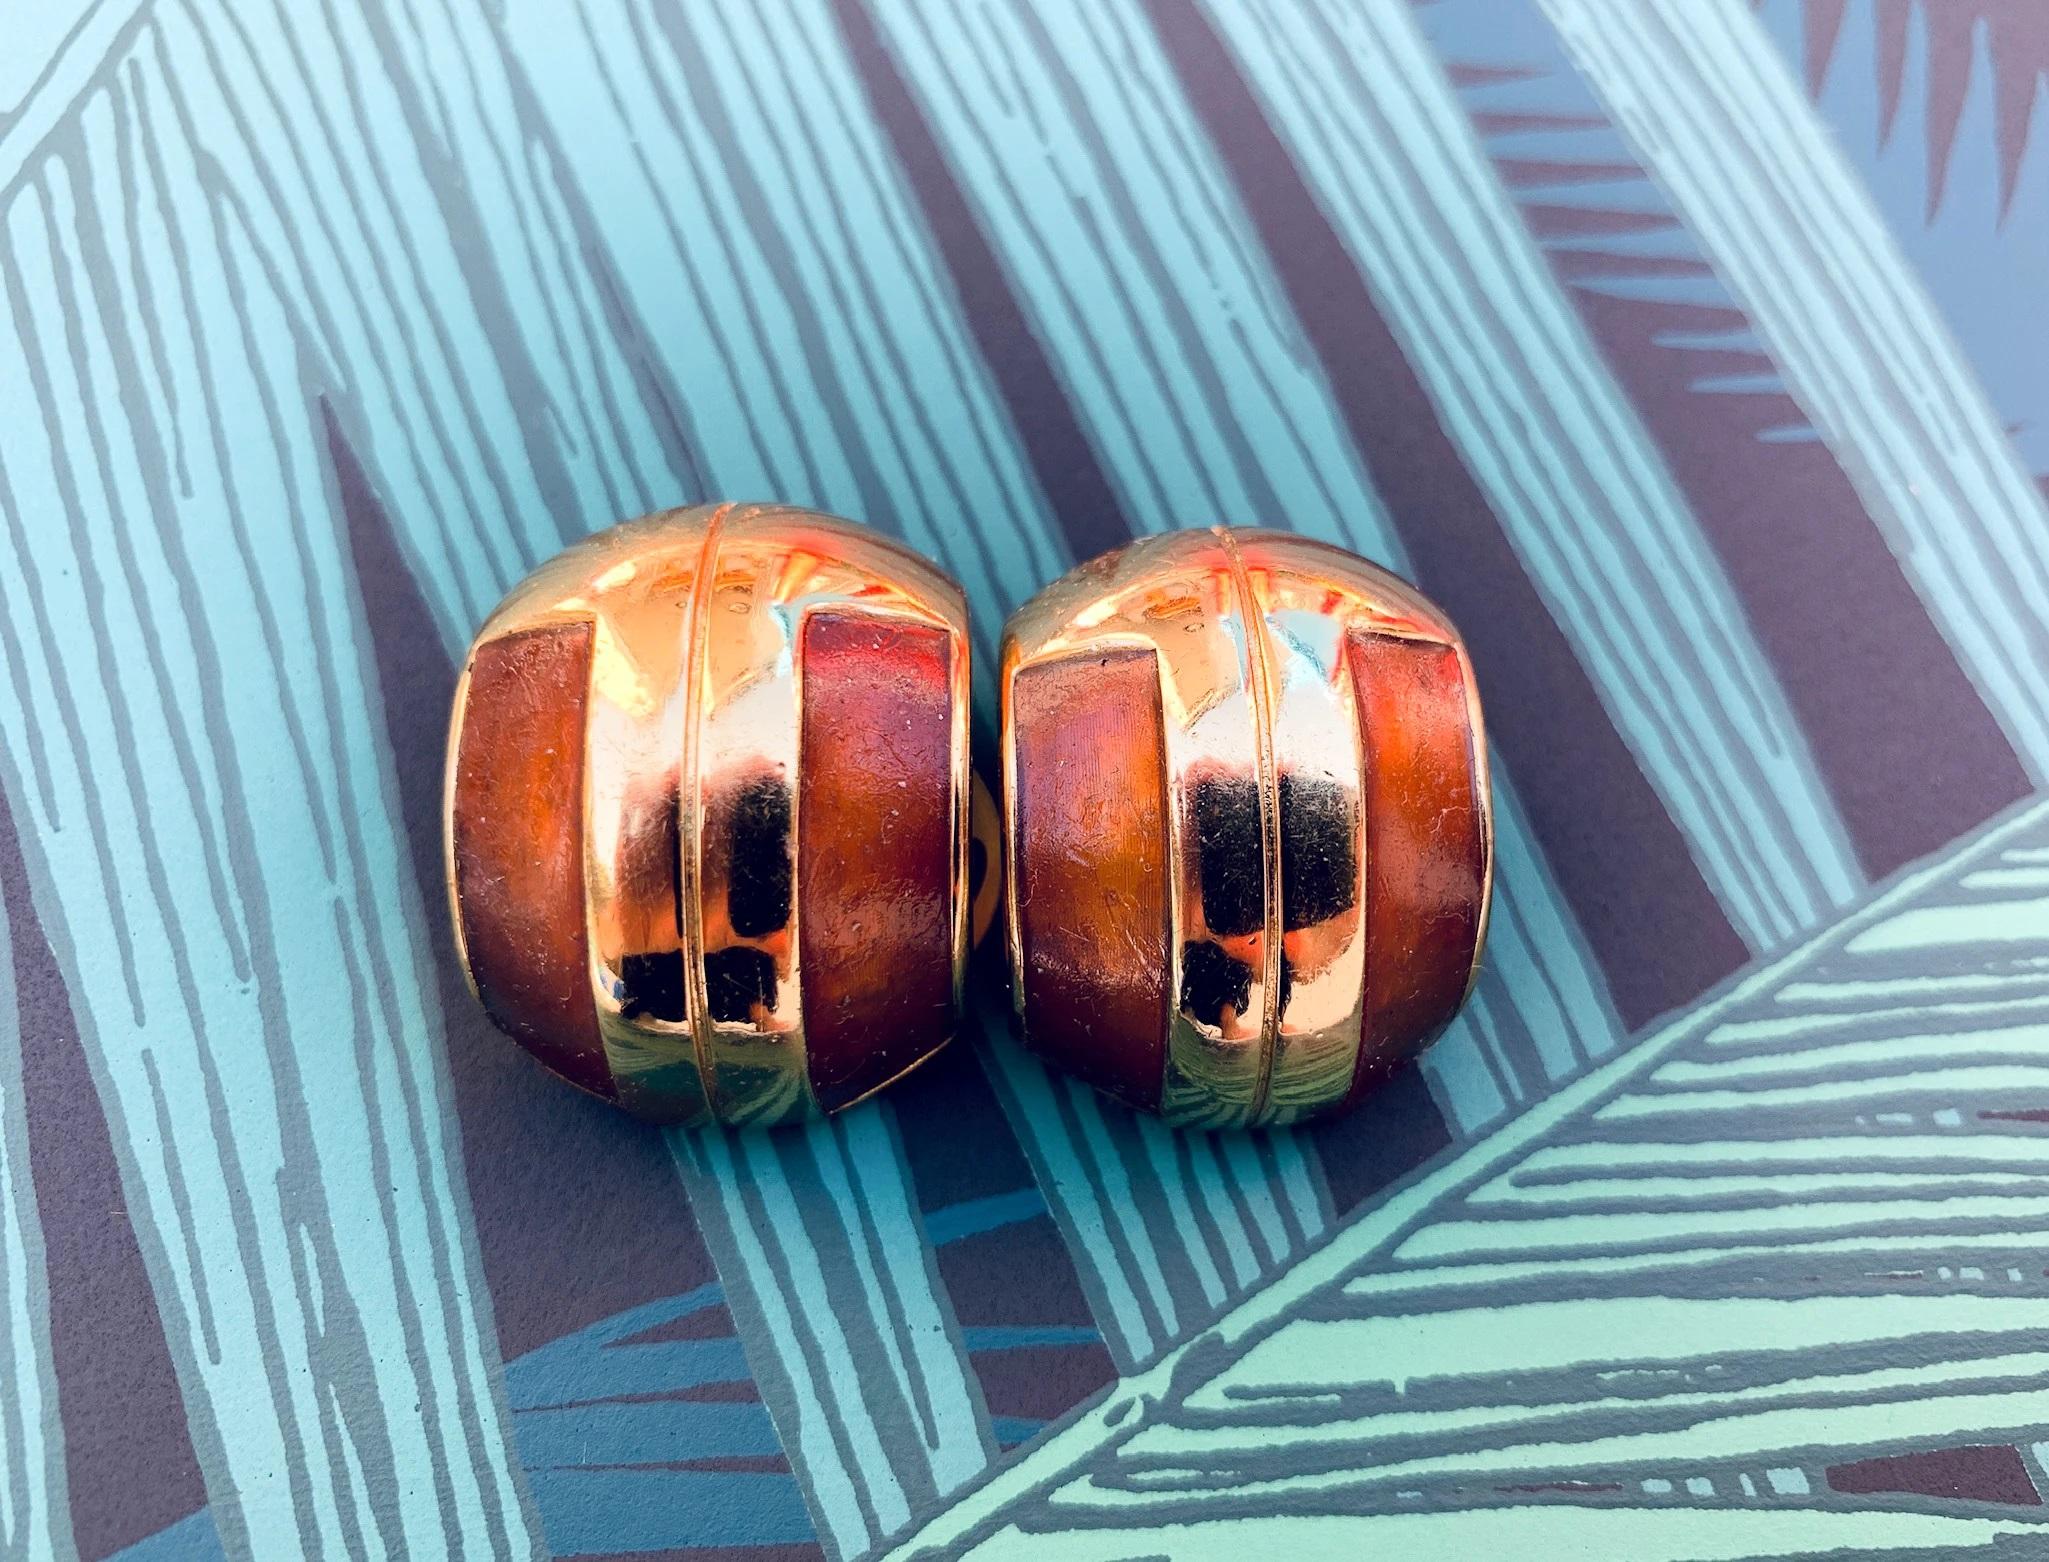 Lanvin 1970s Vintage Statement Clip on Earrings

Incredible statement earrings from the House of Lanvin with classic 70s modernist styling

Detail
-Made in Cast from gold plated metal
-Feature the iconic Lanvin double L logo
-Rich mahogany enamel